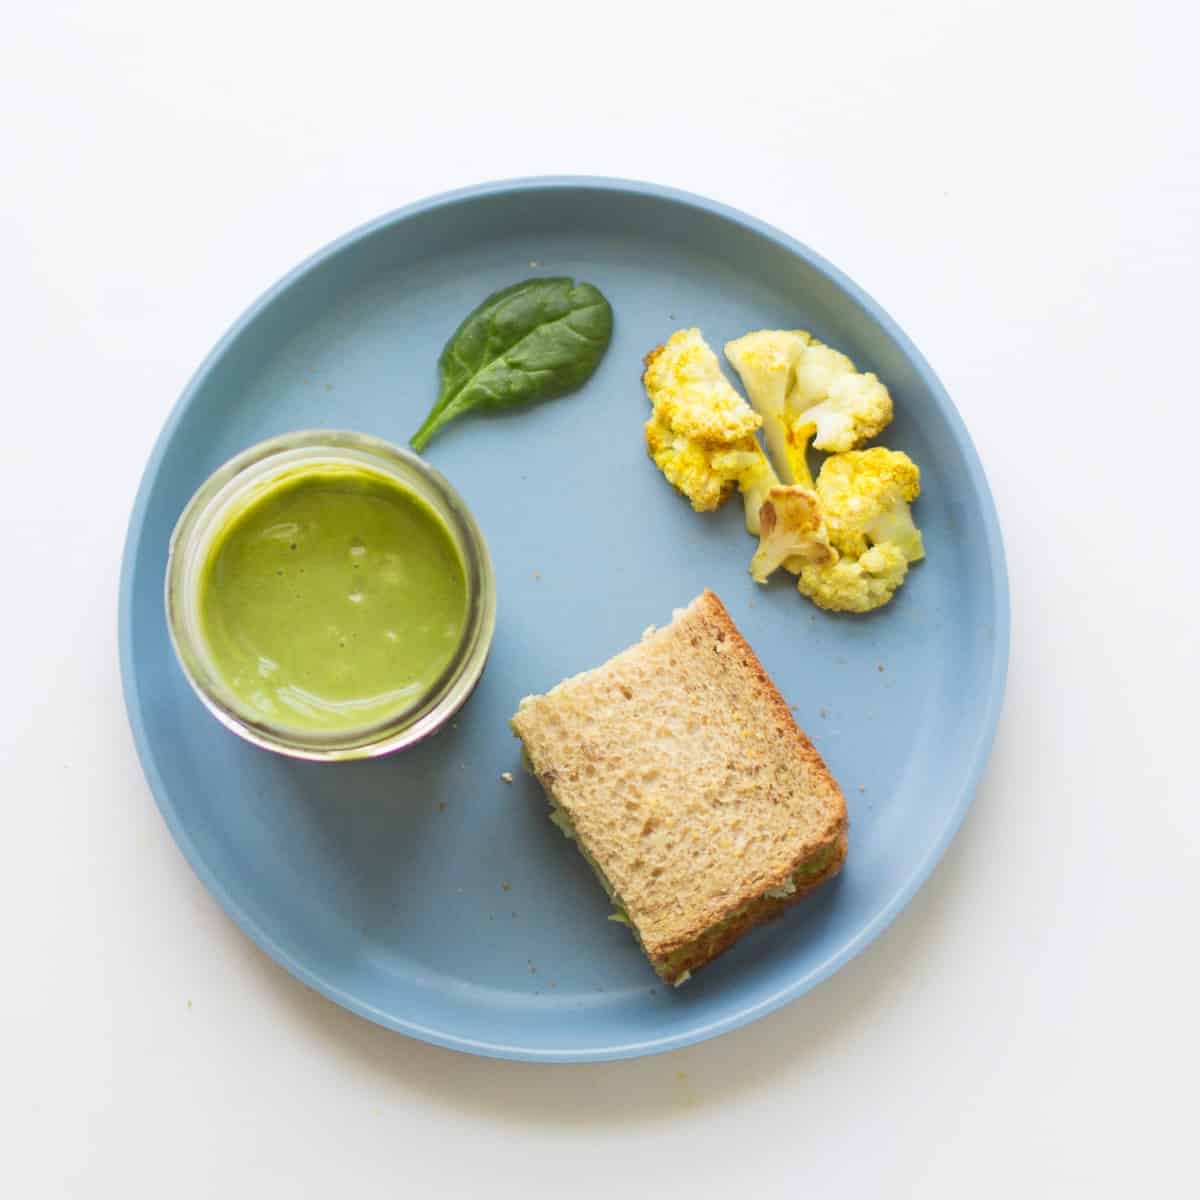 Green smoothie with a sandwich half, curried cauliflower, and one spinach leaf.